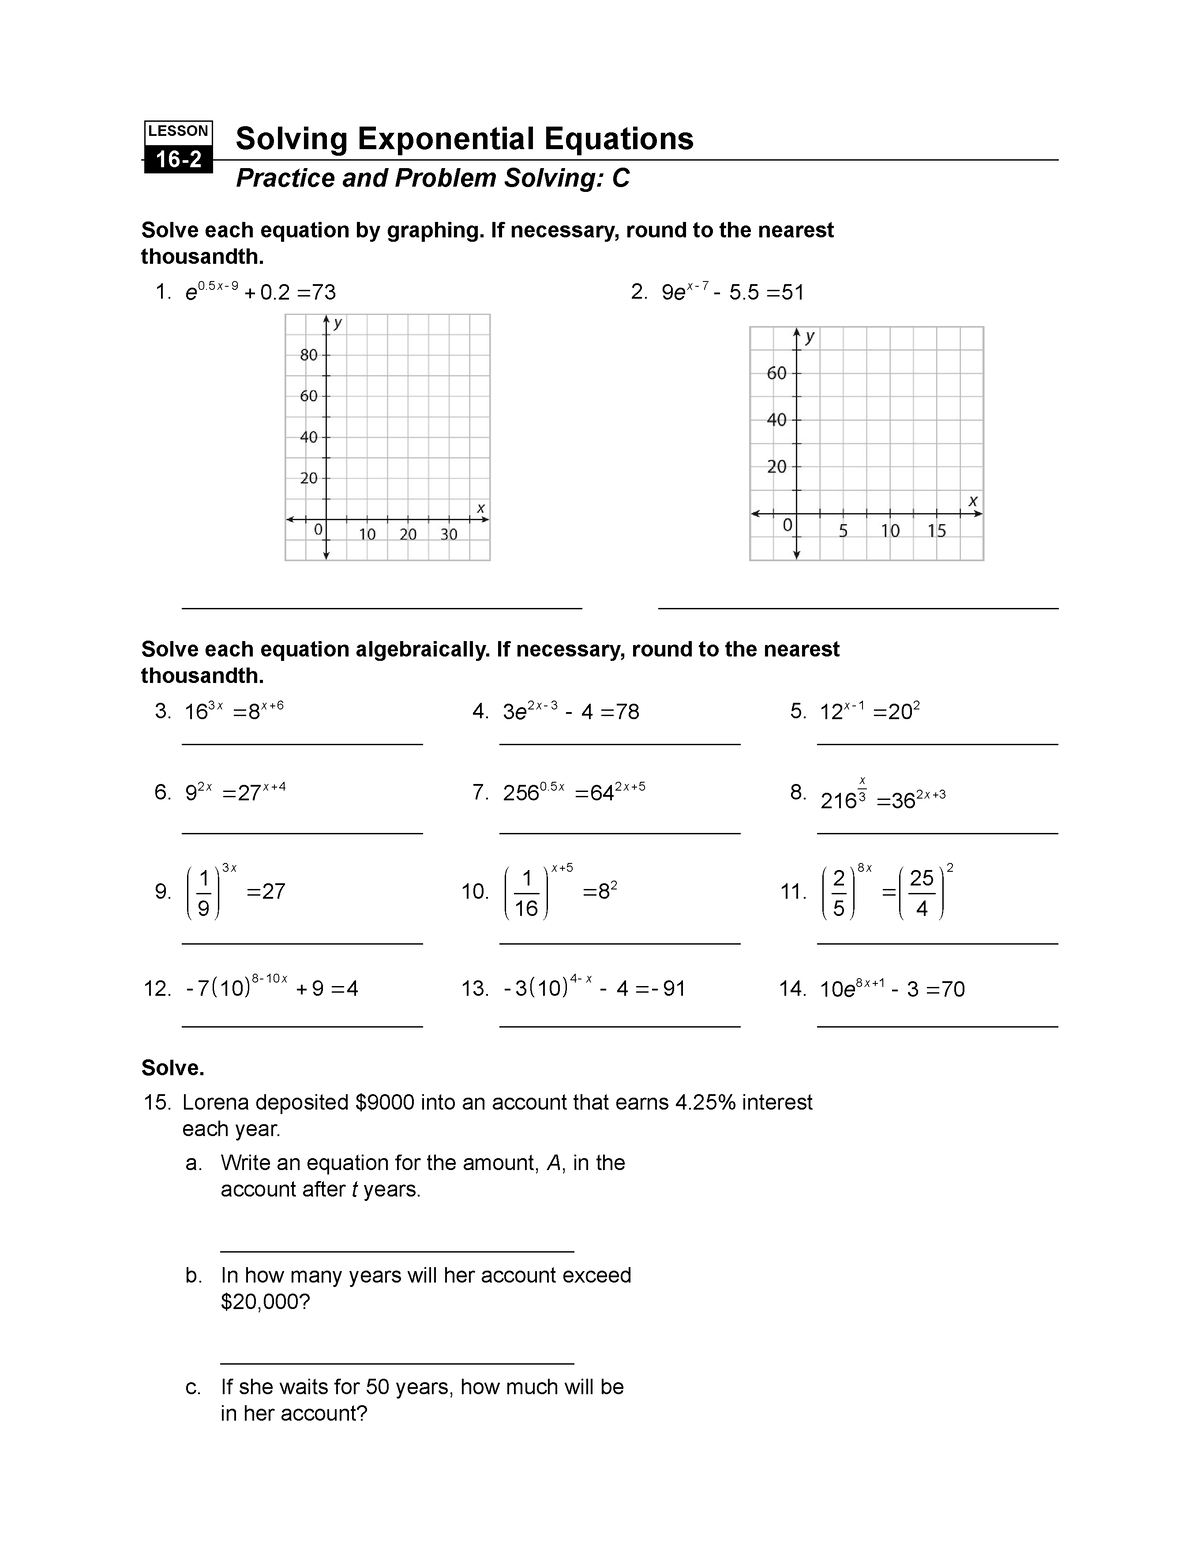 practice and problem solving c answer key